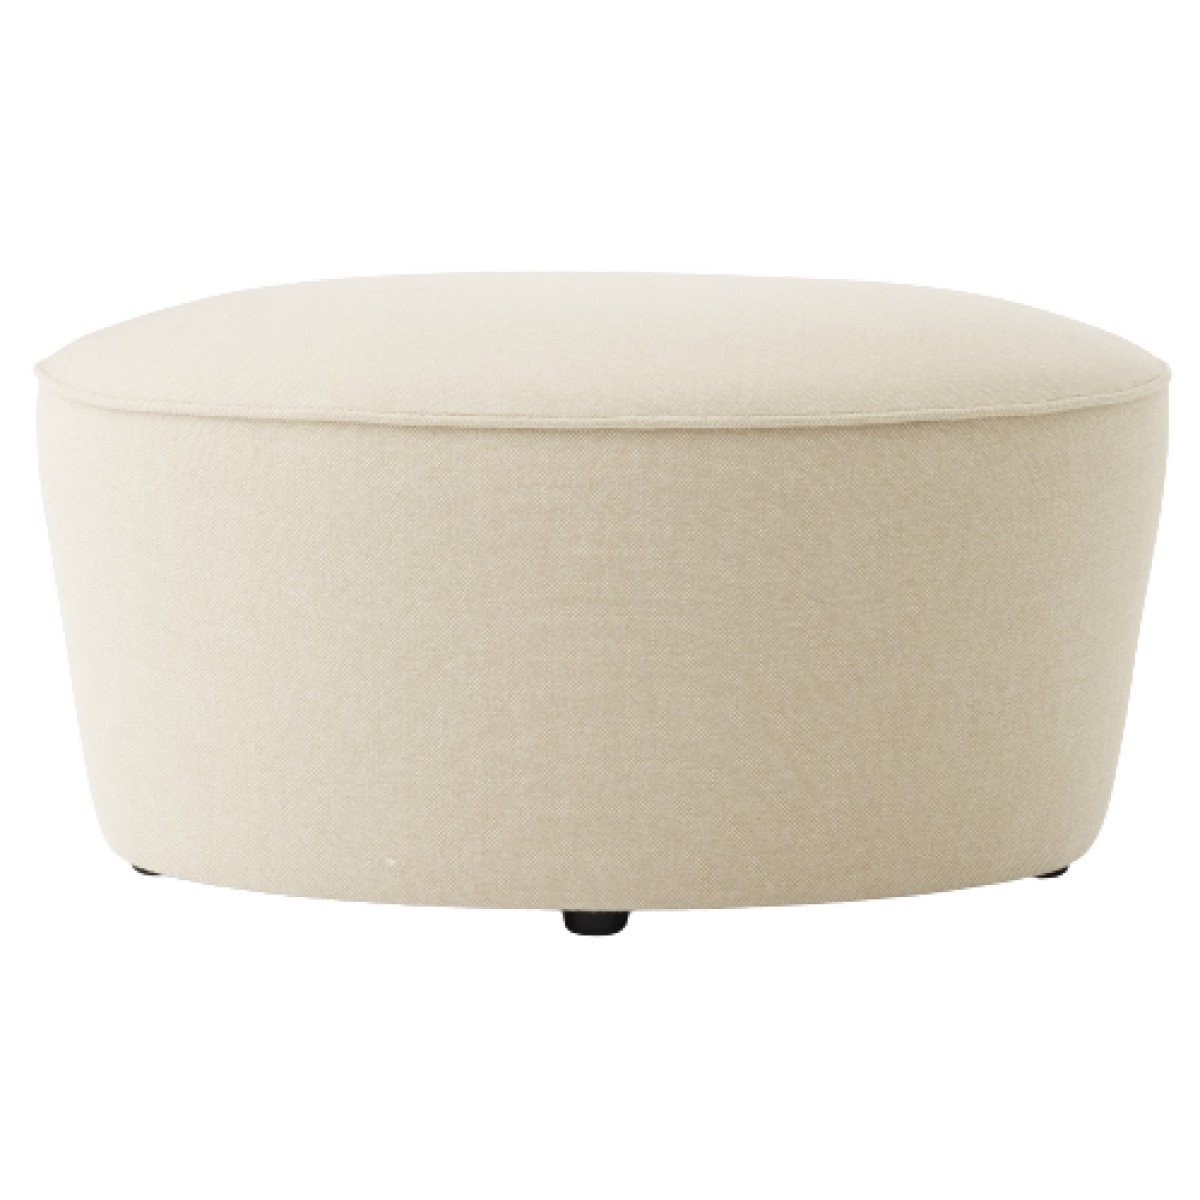 Cairn Pouf, Oval